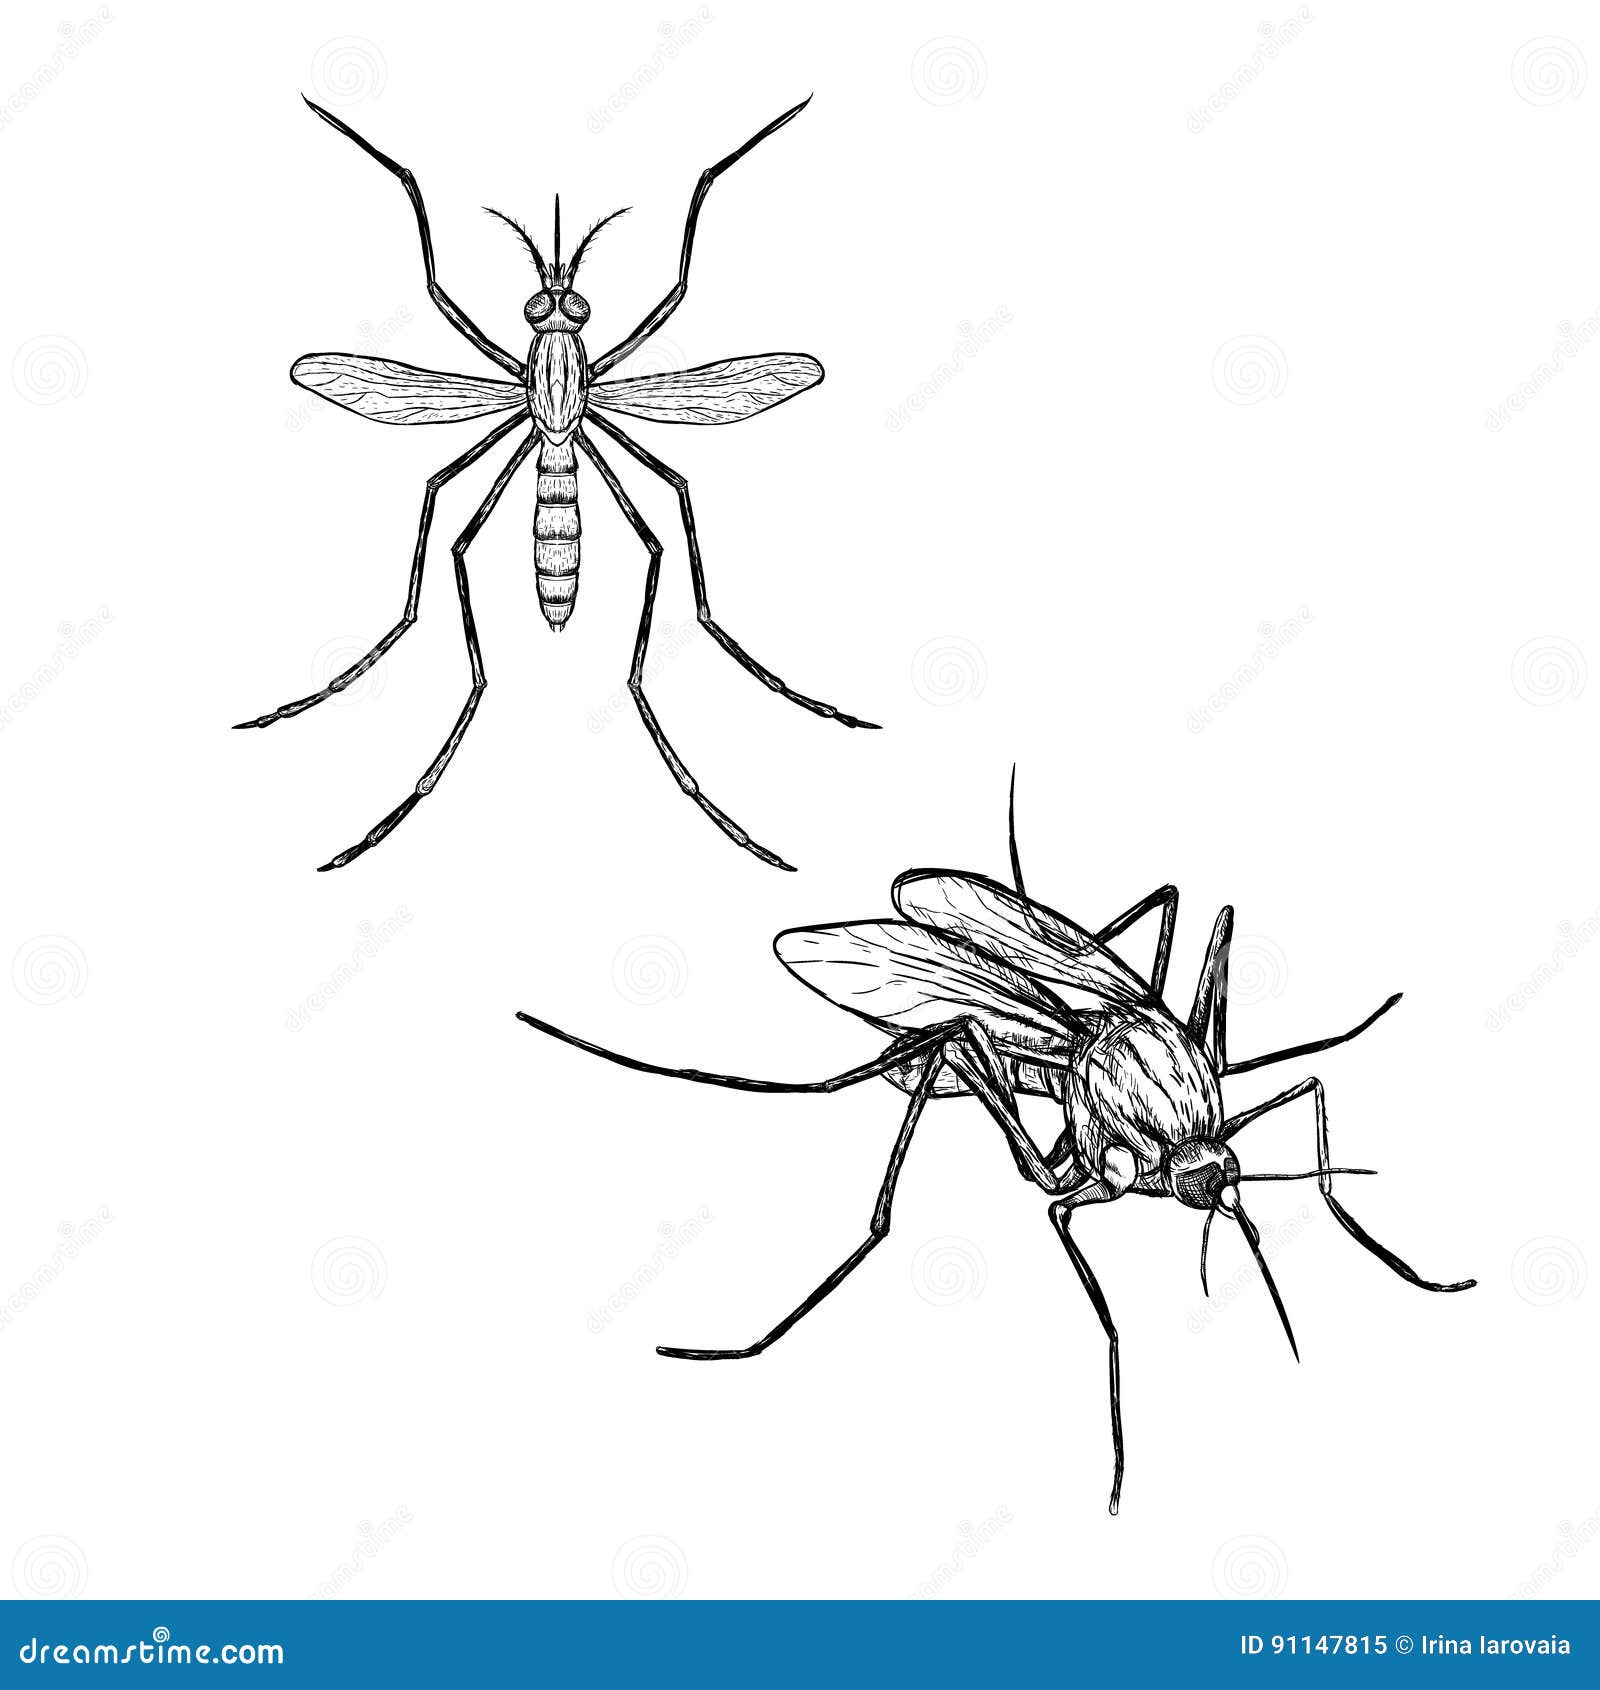 How to Draw a Mosquito step by step  8 Easy Phase  Video